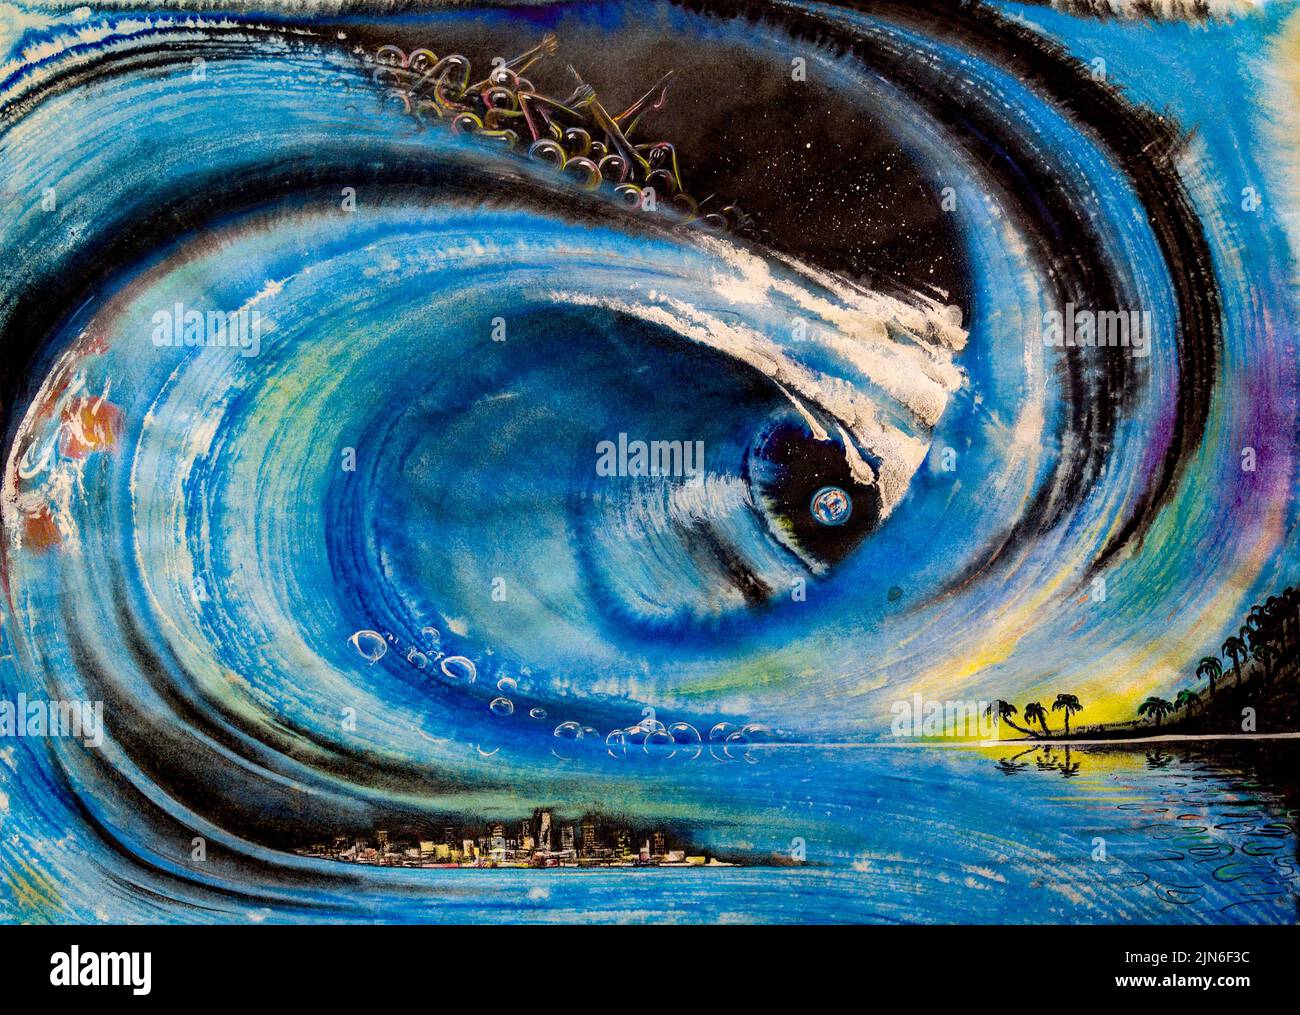 Colorful painted surreal scenery of a huge wave connecting various sceneries Stock Photo